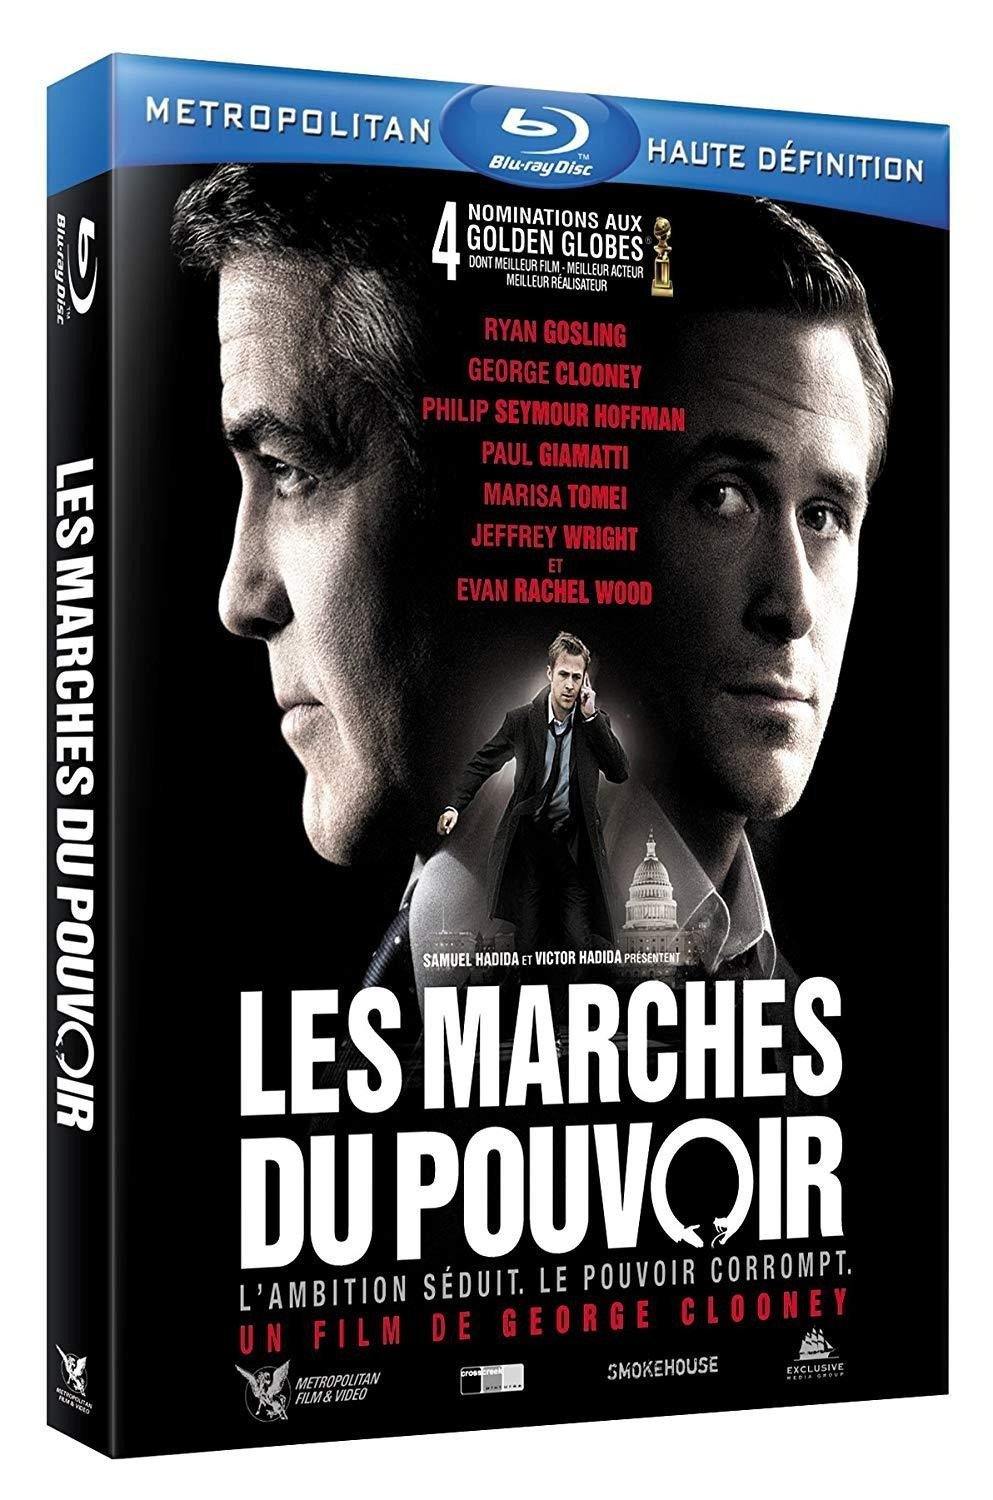 flashvideofilm - Les Marches du pouvoir (2011) - Blu-ray The Ides of March - Blu-ray